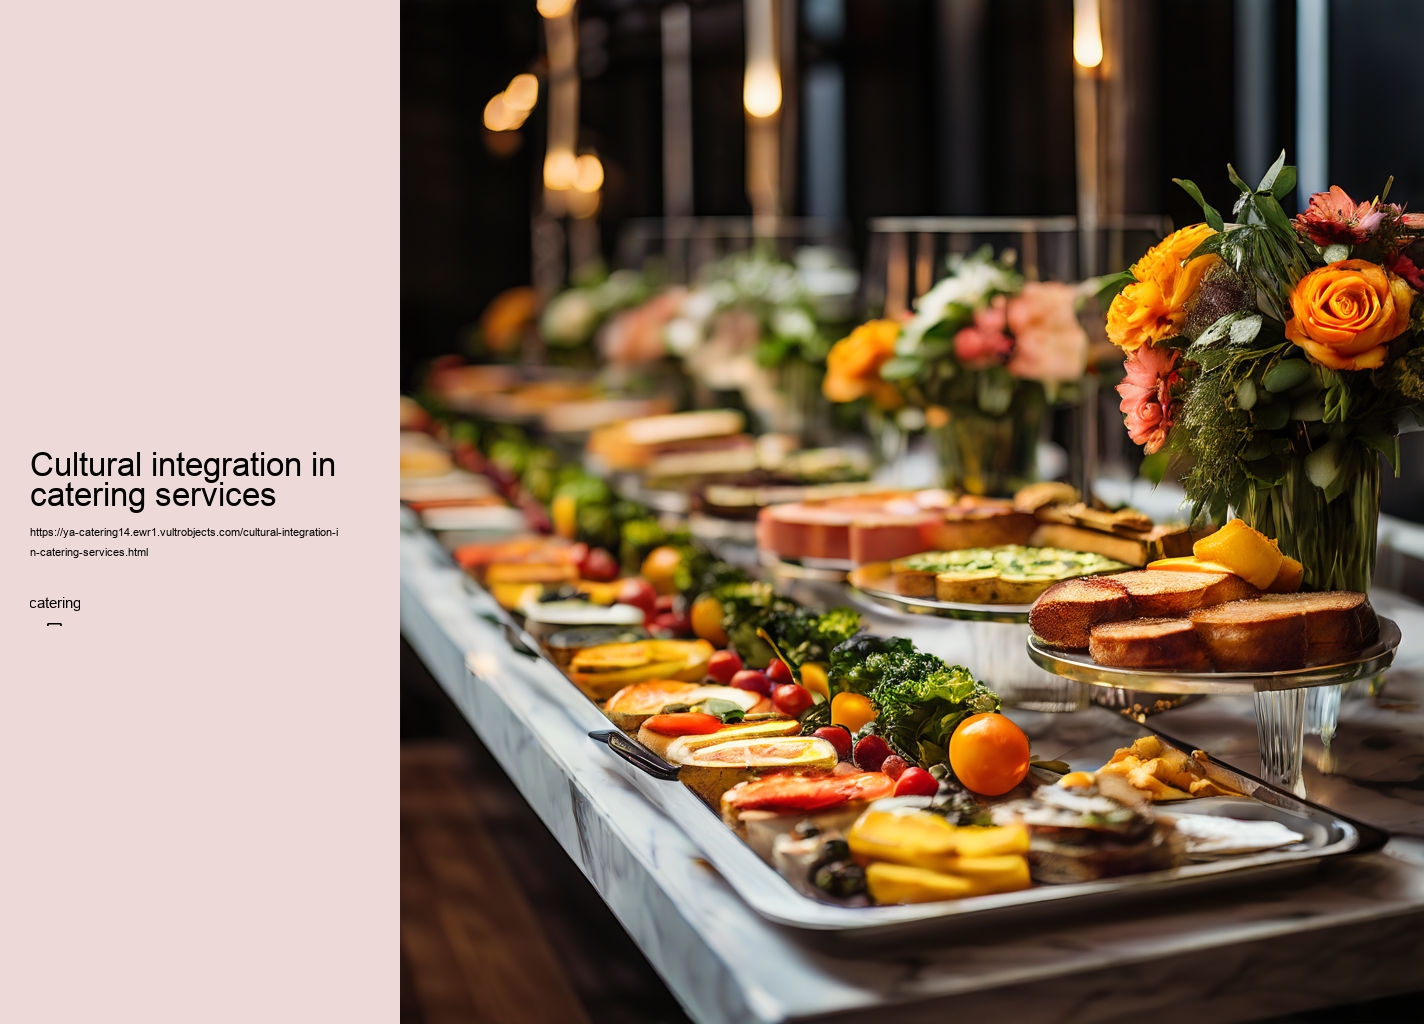 Cultural integration in catering services